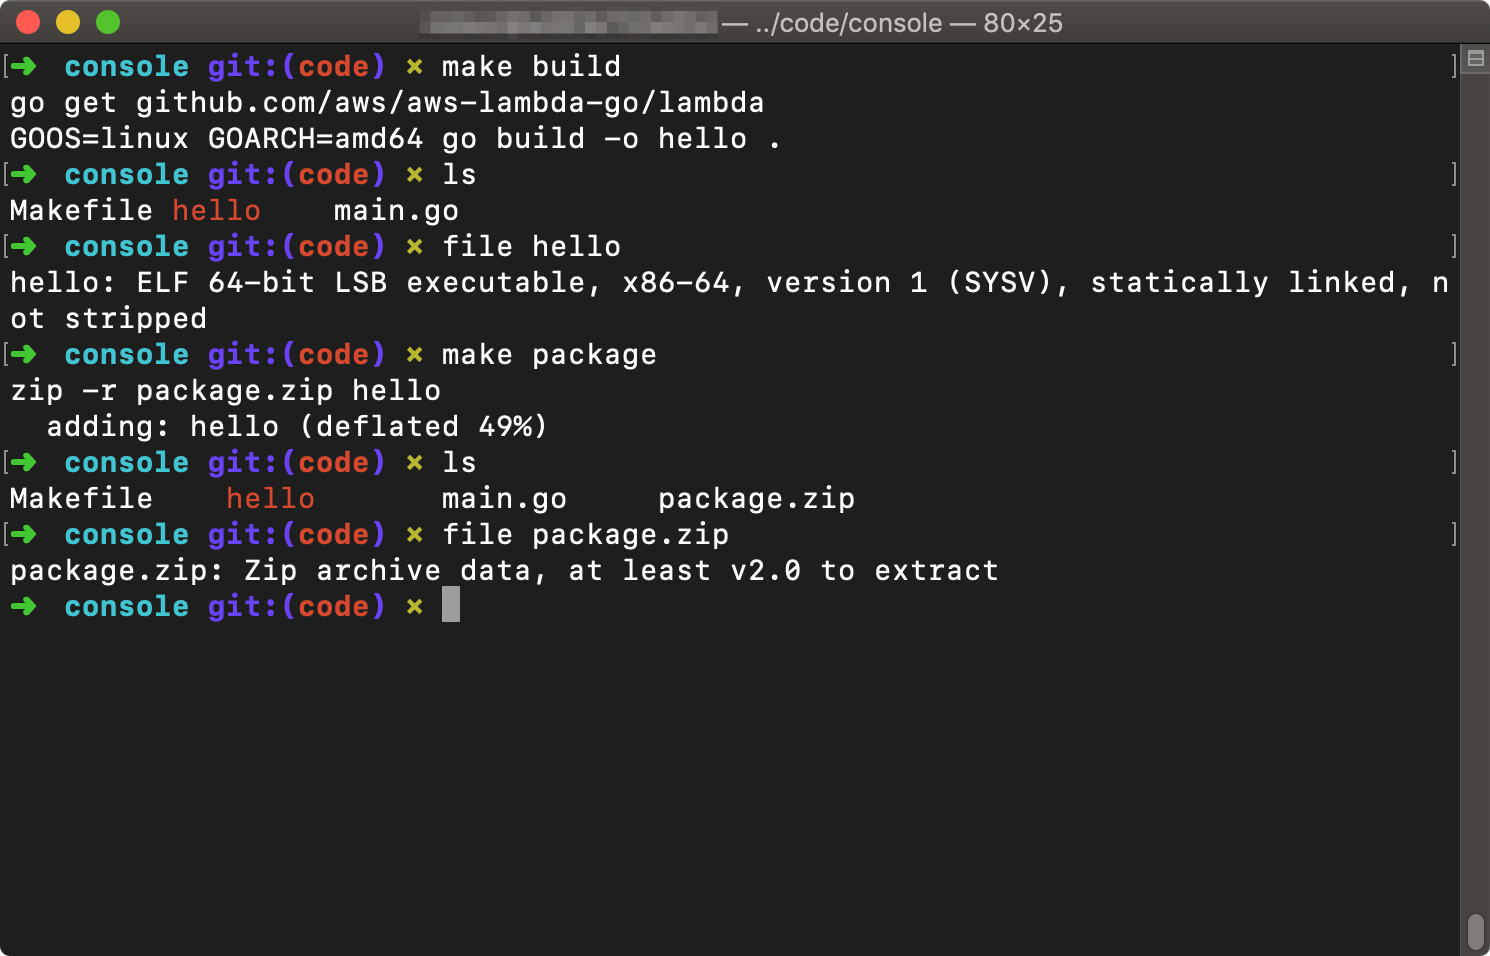 Terminal showing results of 'make build' and 'make package' commands.